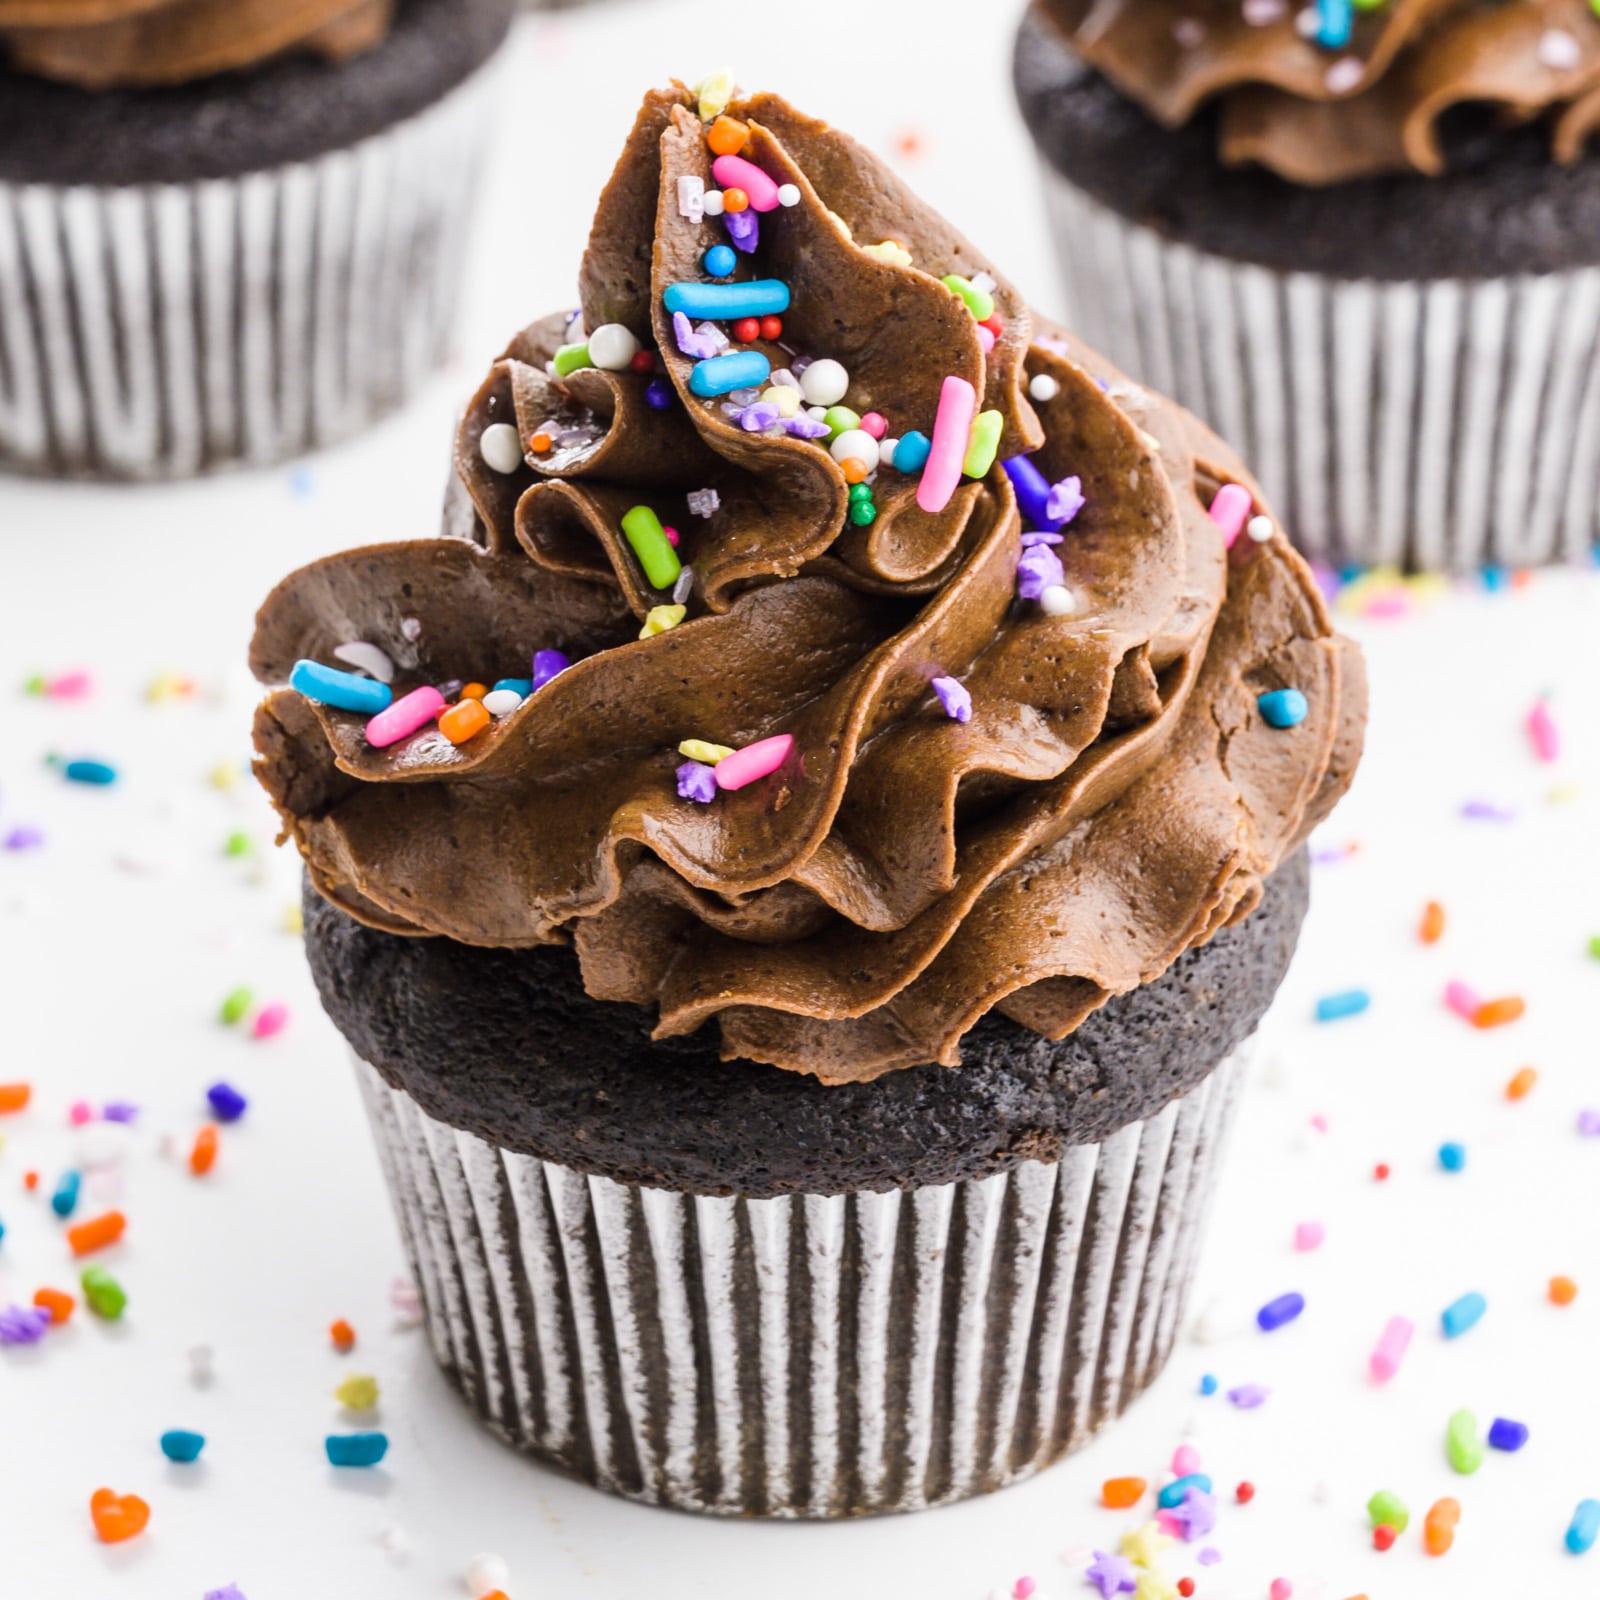 A chocolate cupcake has lots of colorful sprinkles on it and around it.